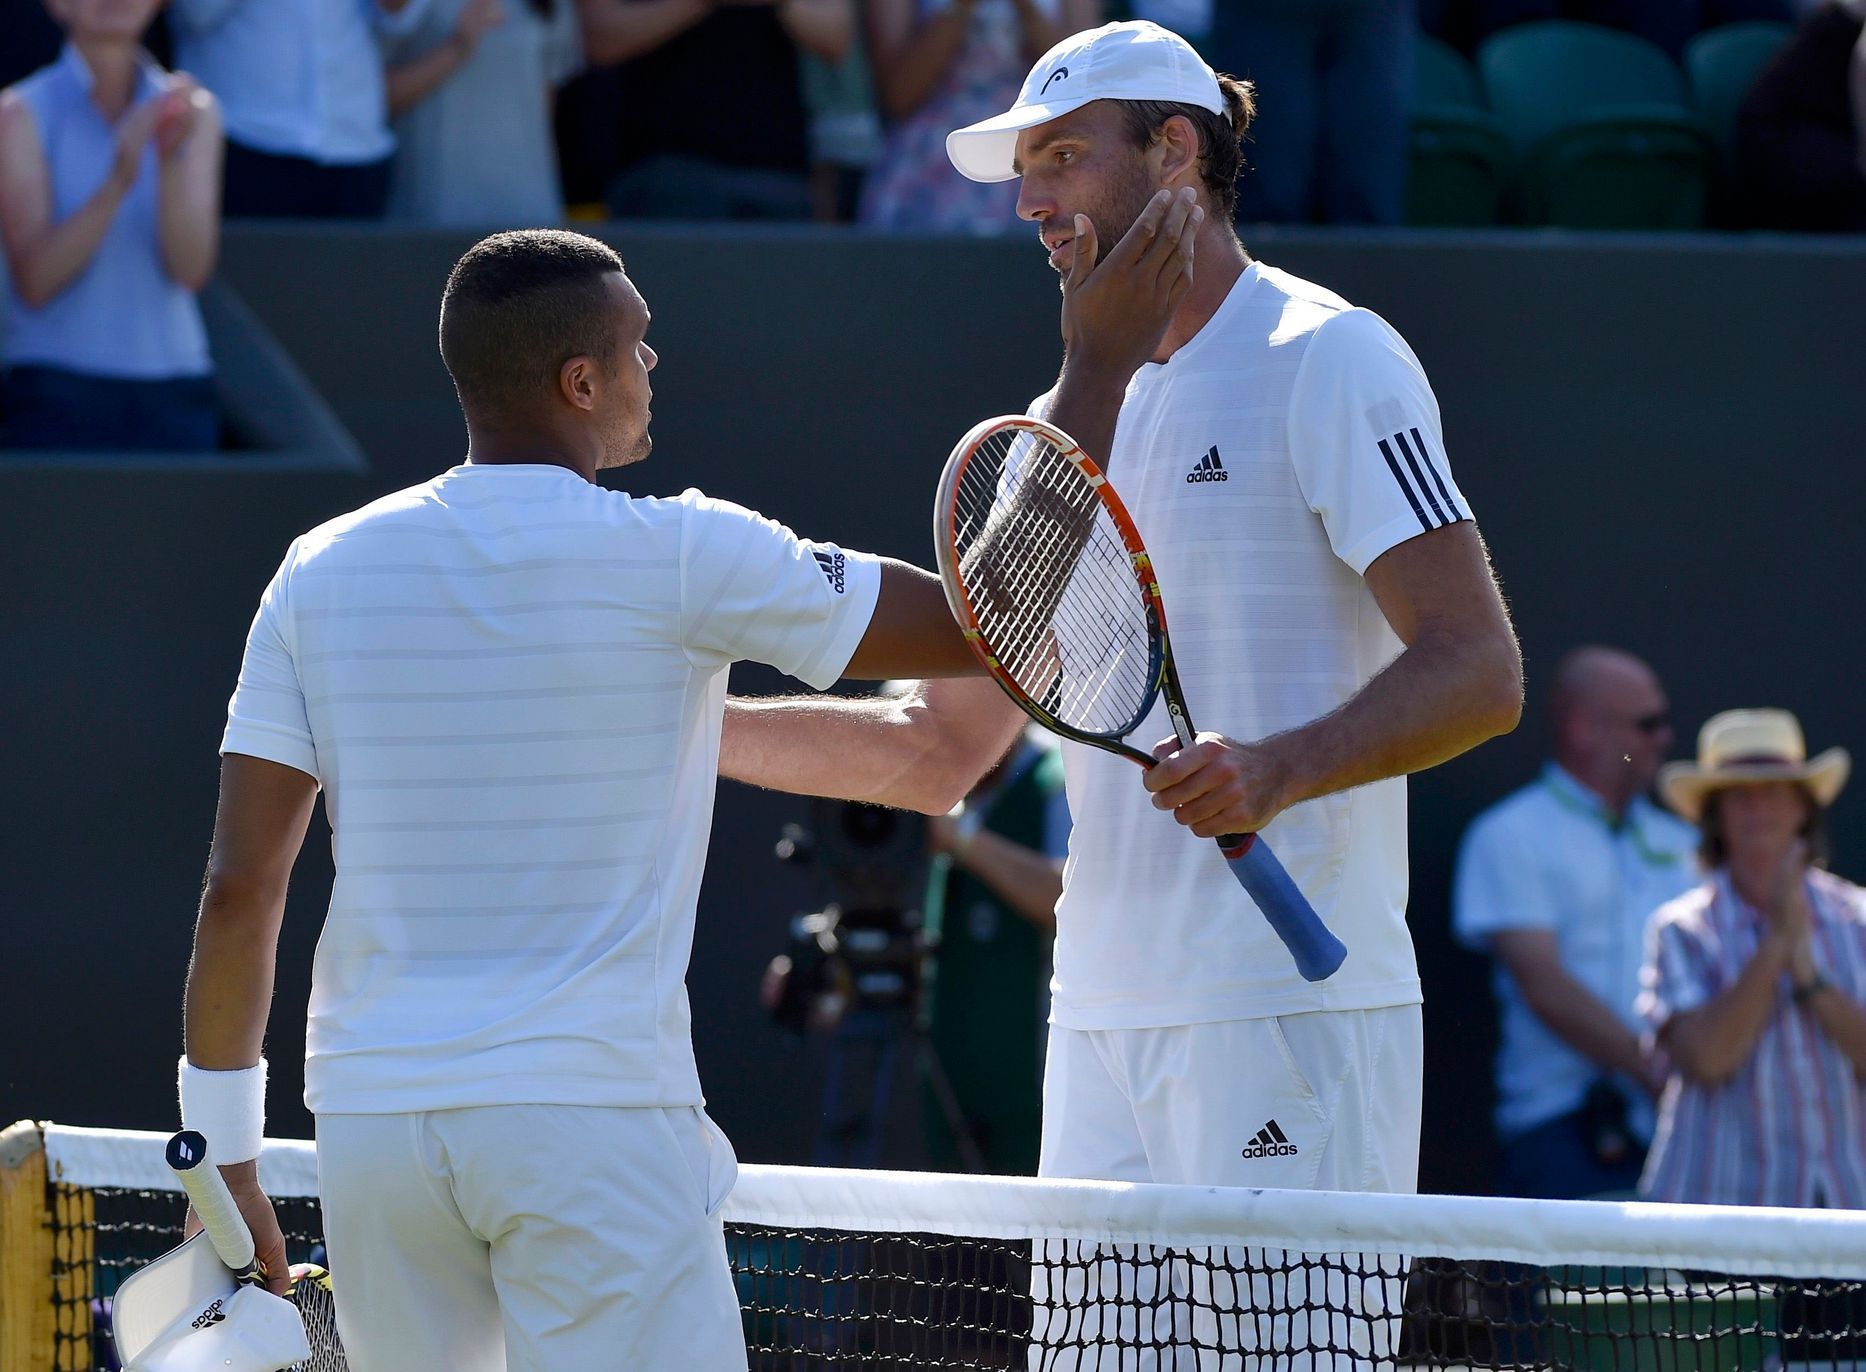 Ivo Karlovic of Croatia meets Jo-Wilfried Tsonga of France at the net after winning their match at the Wimbledon Tennis Championships in London